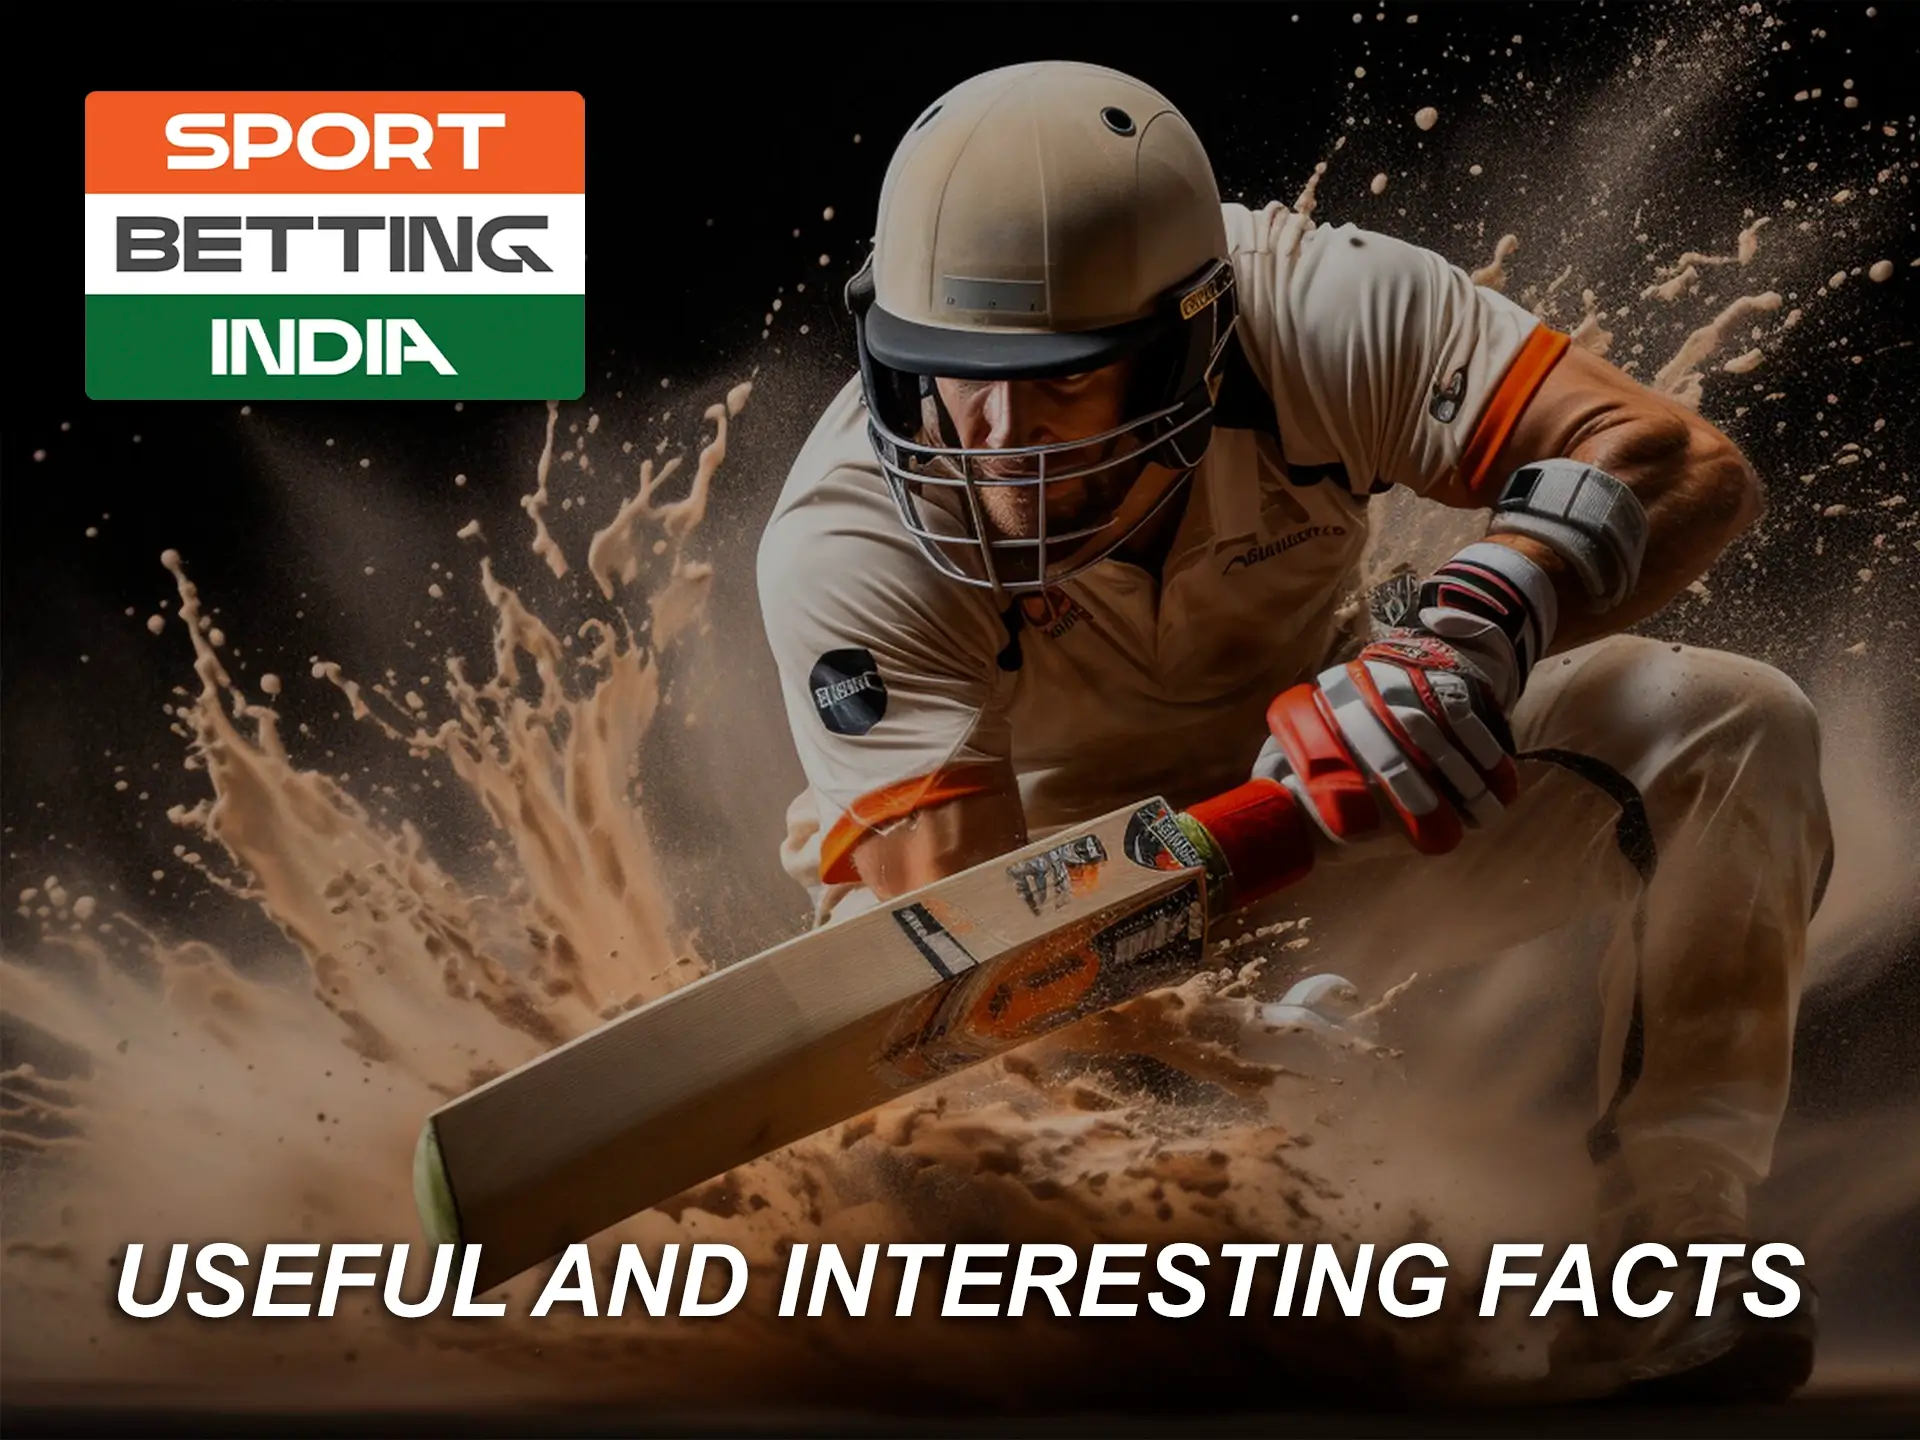 Read about the history of gambling in India and find out the most popular sports to bet on.